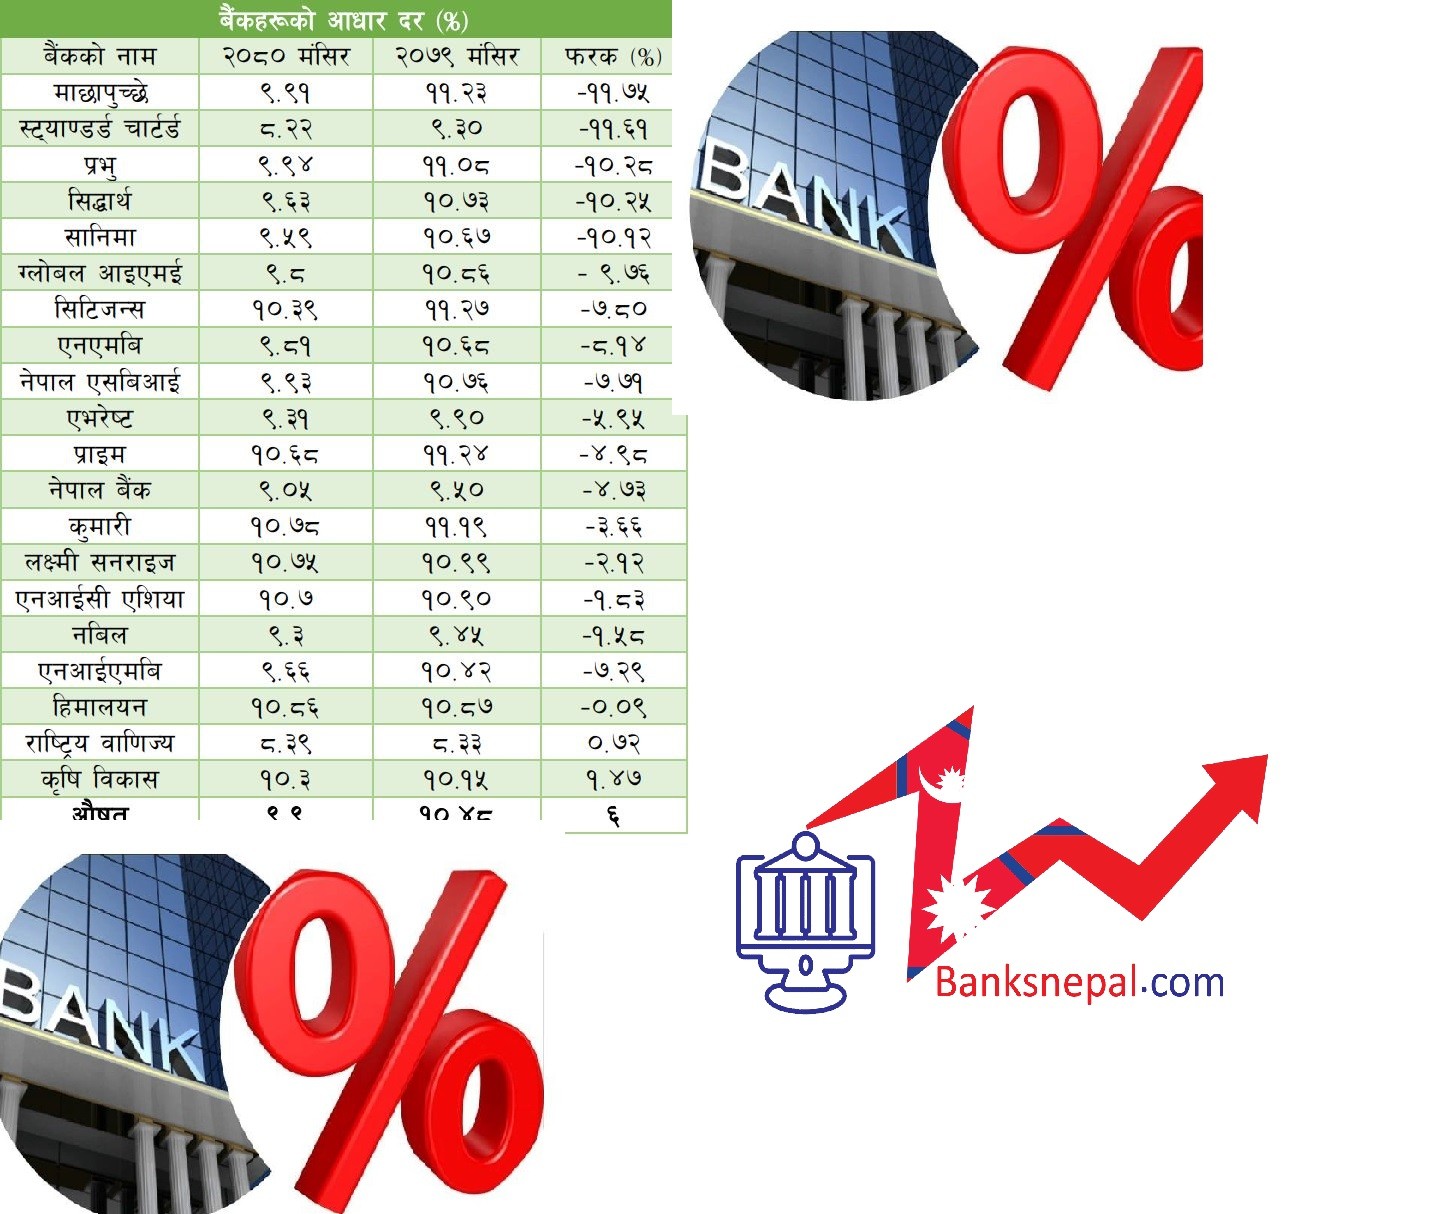 Banks base rate has decreased, and How much banks base rate in Nepal ?